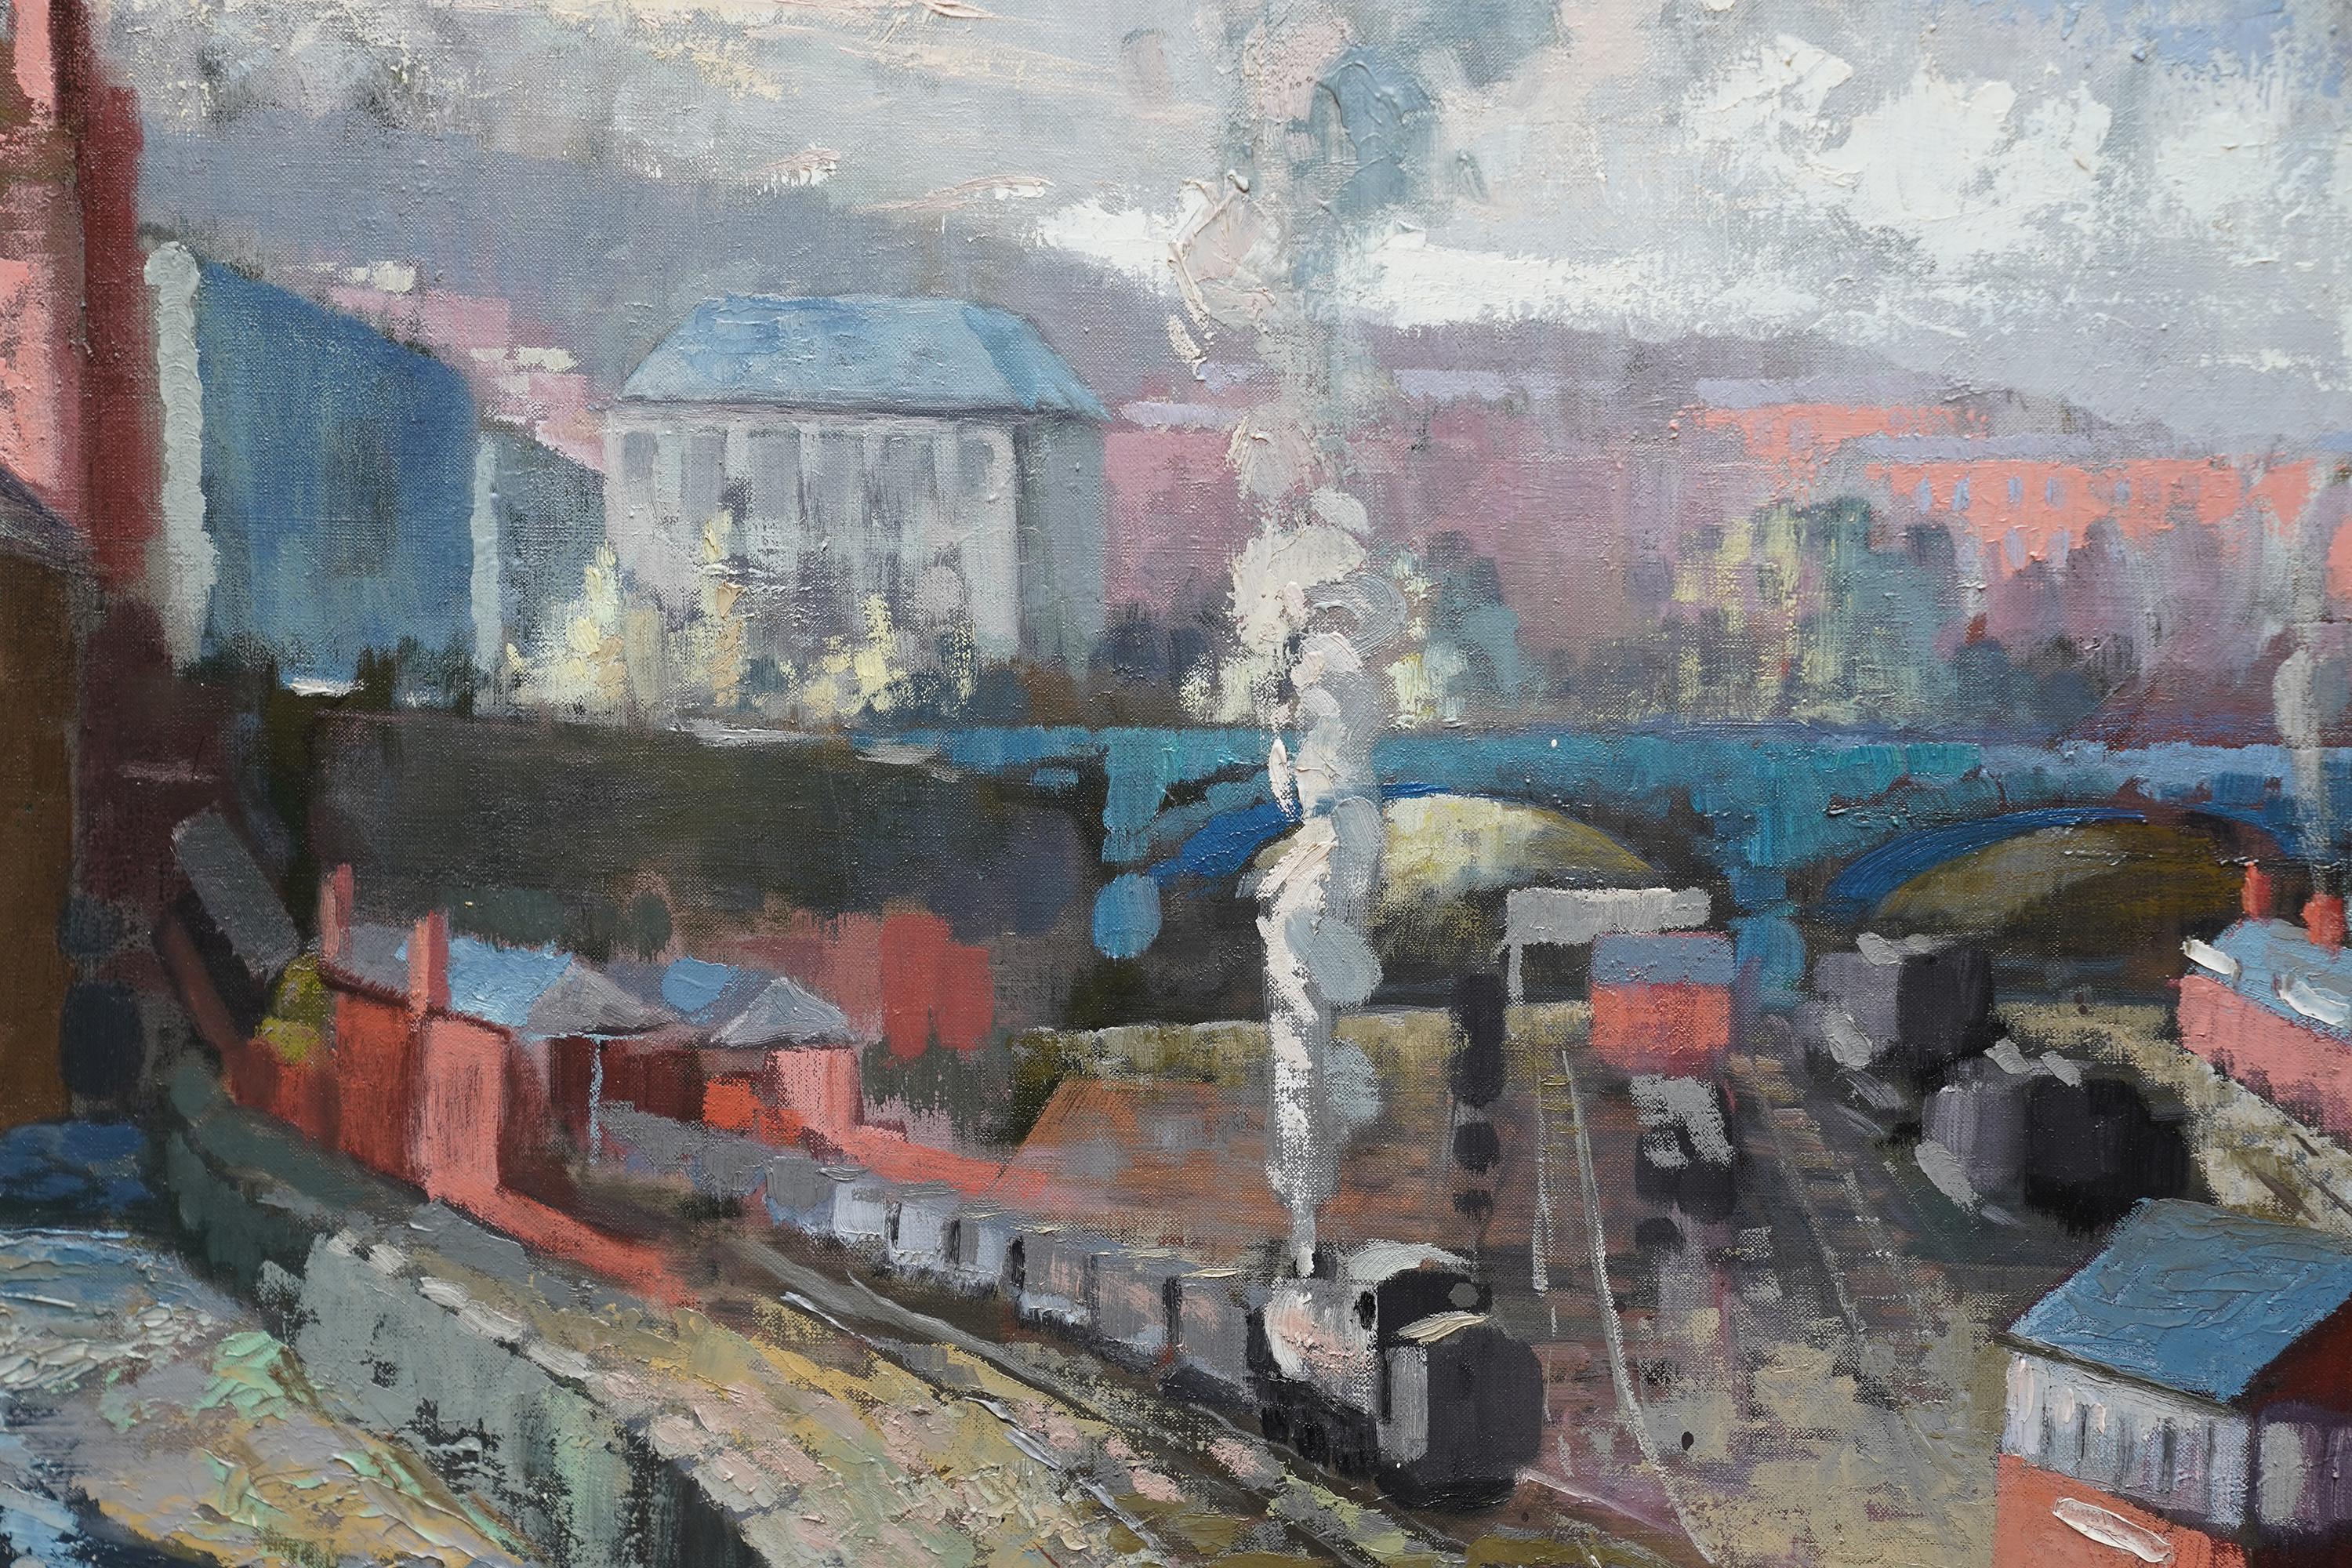 Industrial Railway Landscape - Scottish 50s art Post Impressionist oil painting - Post-Impressionist Painting by Harry Jefferson Barnes